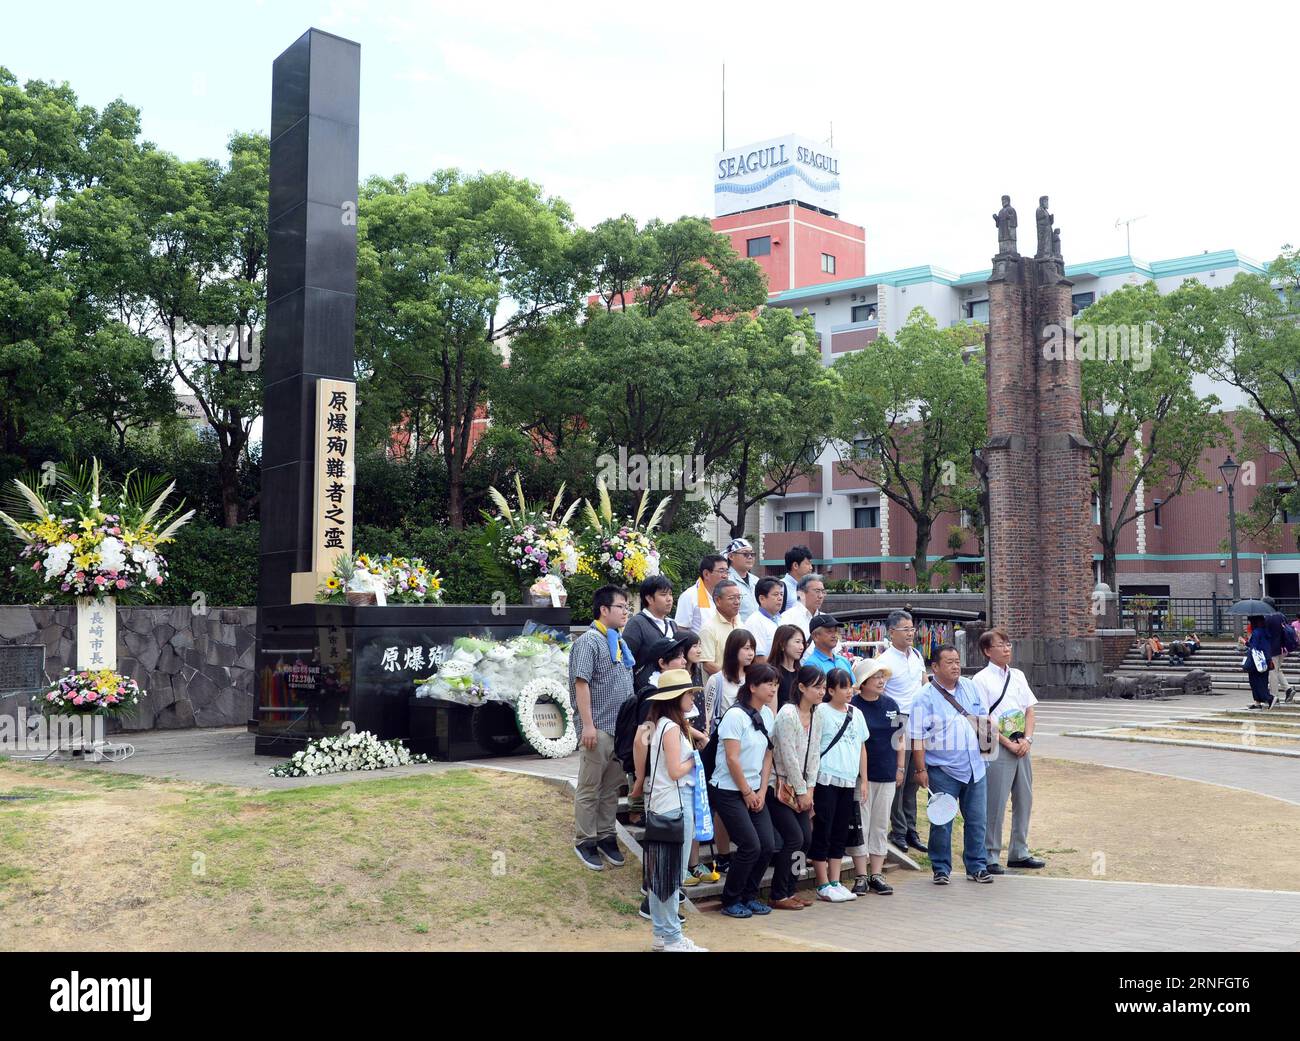 71. Jahrestag des Atombombenabwurfs auf Nagasaki (160809) -- NAGASAKI, Aug. 9, 2016 -- People pose for photos in front of the monument at the atomic bomb hypocenter to commemorate the 71st anniversary of U.S. atomic bombing, at the Peace Park in Nagasaki, on Aug. 9, 2016. To accelerate Japan s surrender in the World War II, the U.S. forces dropped two atomic bombs on Hiroshima and Nagasaki respectively on Aug. 6 and 9, 1945. ) (syq) JAPAN-NAGASAKI-ATOMIC BOMBING-71ST ANNIVERSARY-COMMEMORATION MaxPing PUBLICATIONxNOTxINxCHN   71 Anniversary the Atombombenabwurfs on Nagasaki 160809 Nagasaki Aug Stock Photo